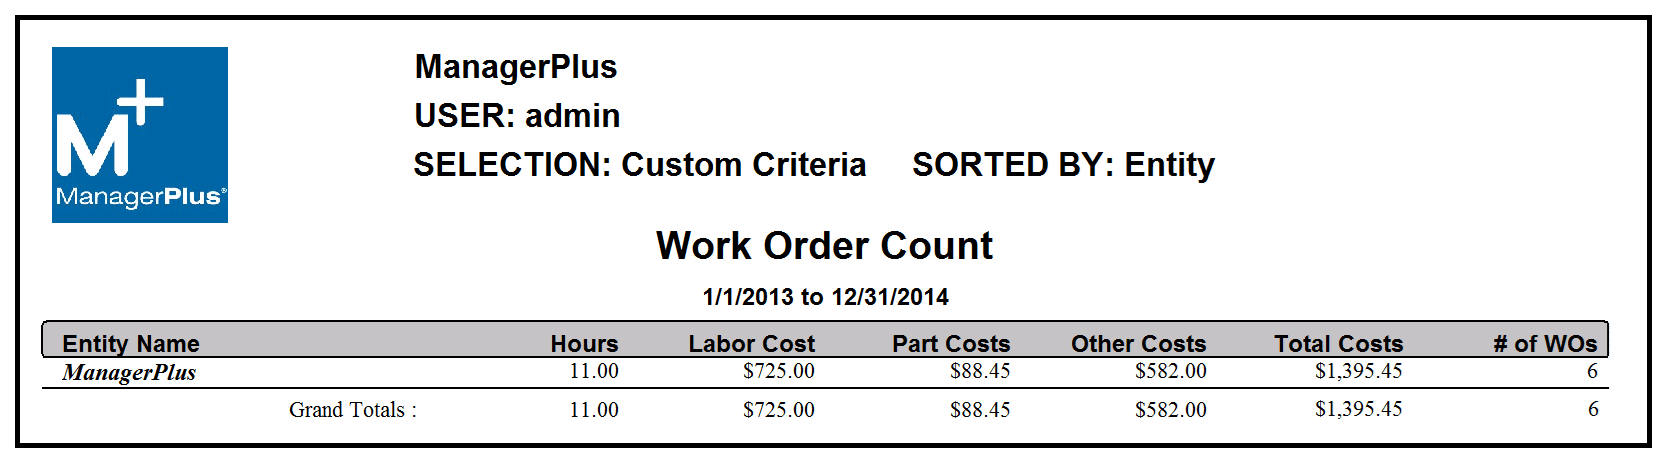 Work-Order-Count